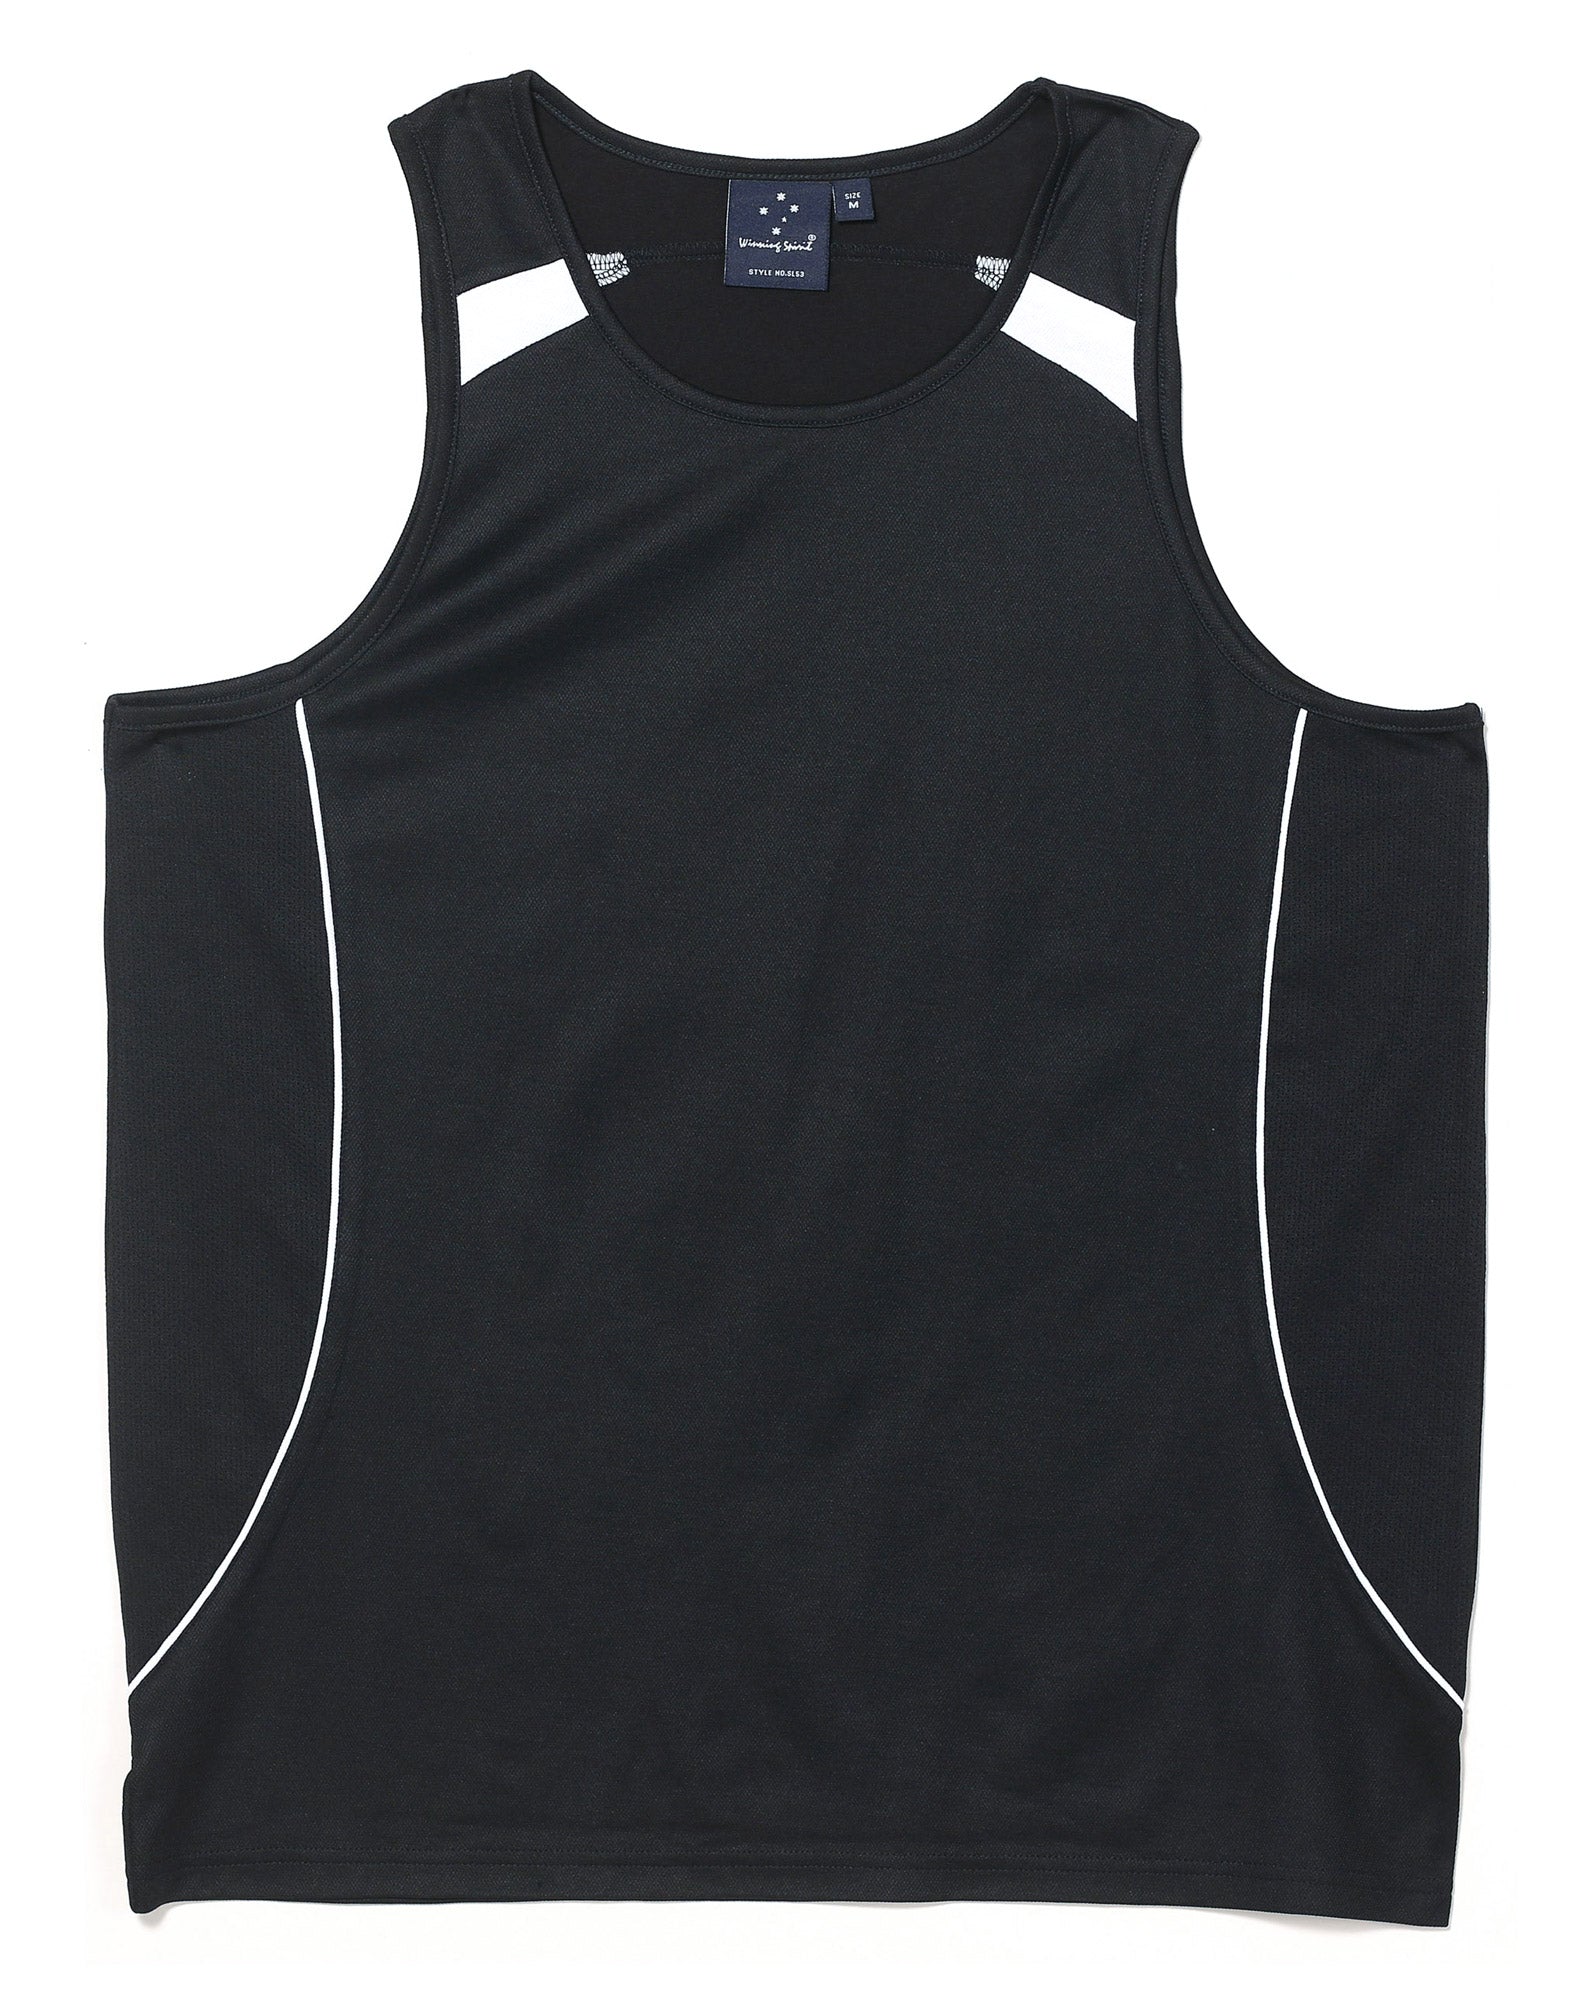 Legend Cotton Back Singlet - made by AIW